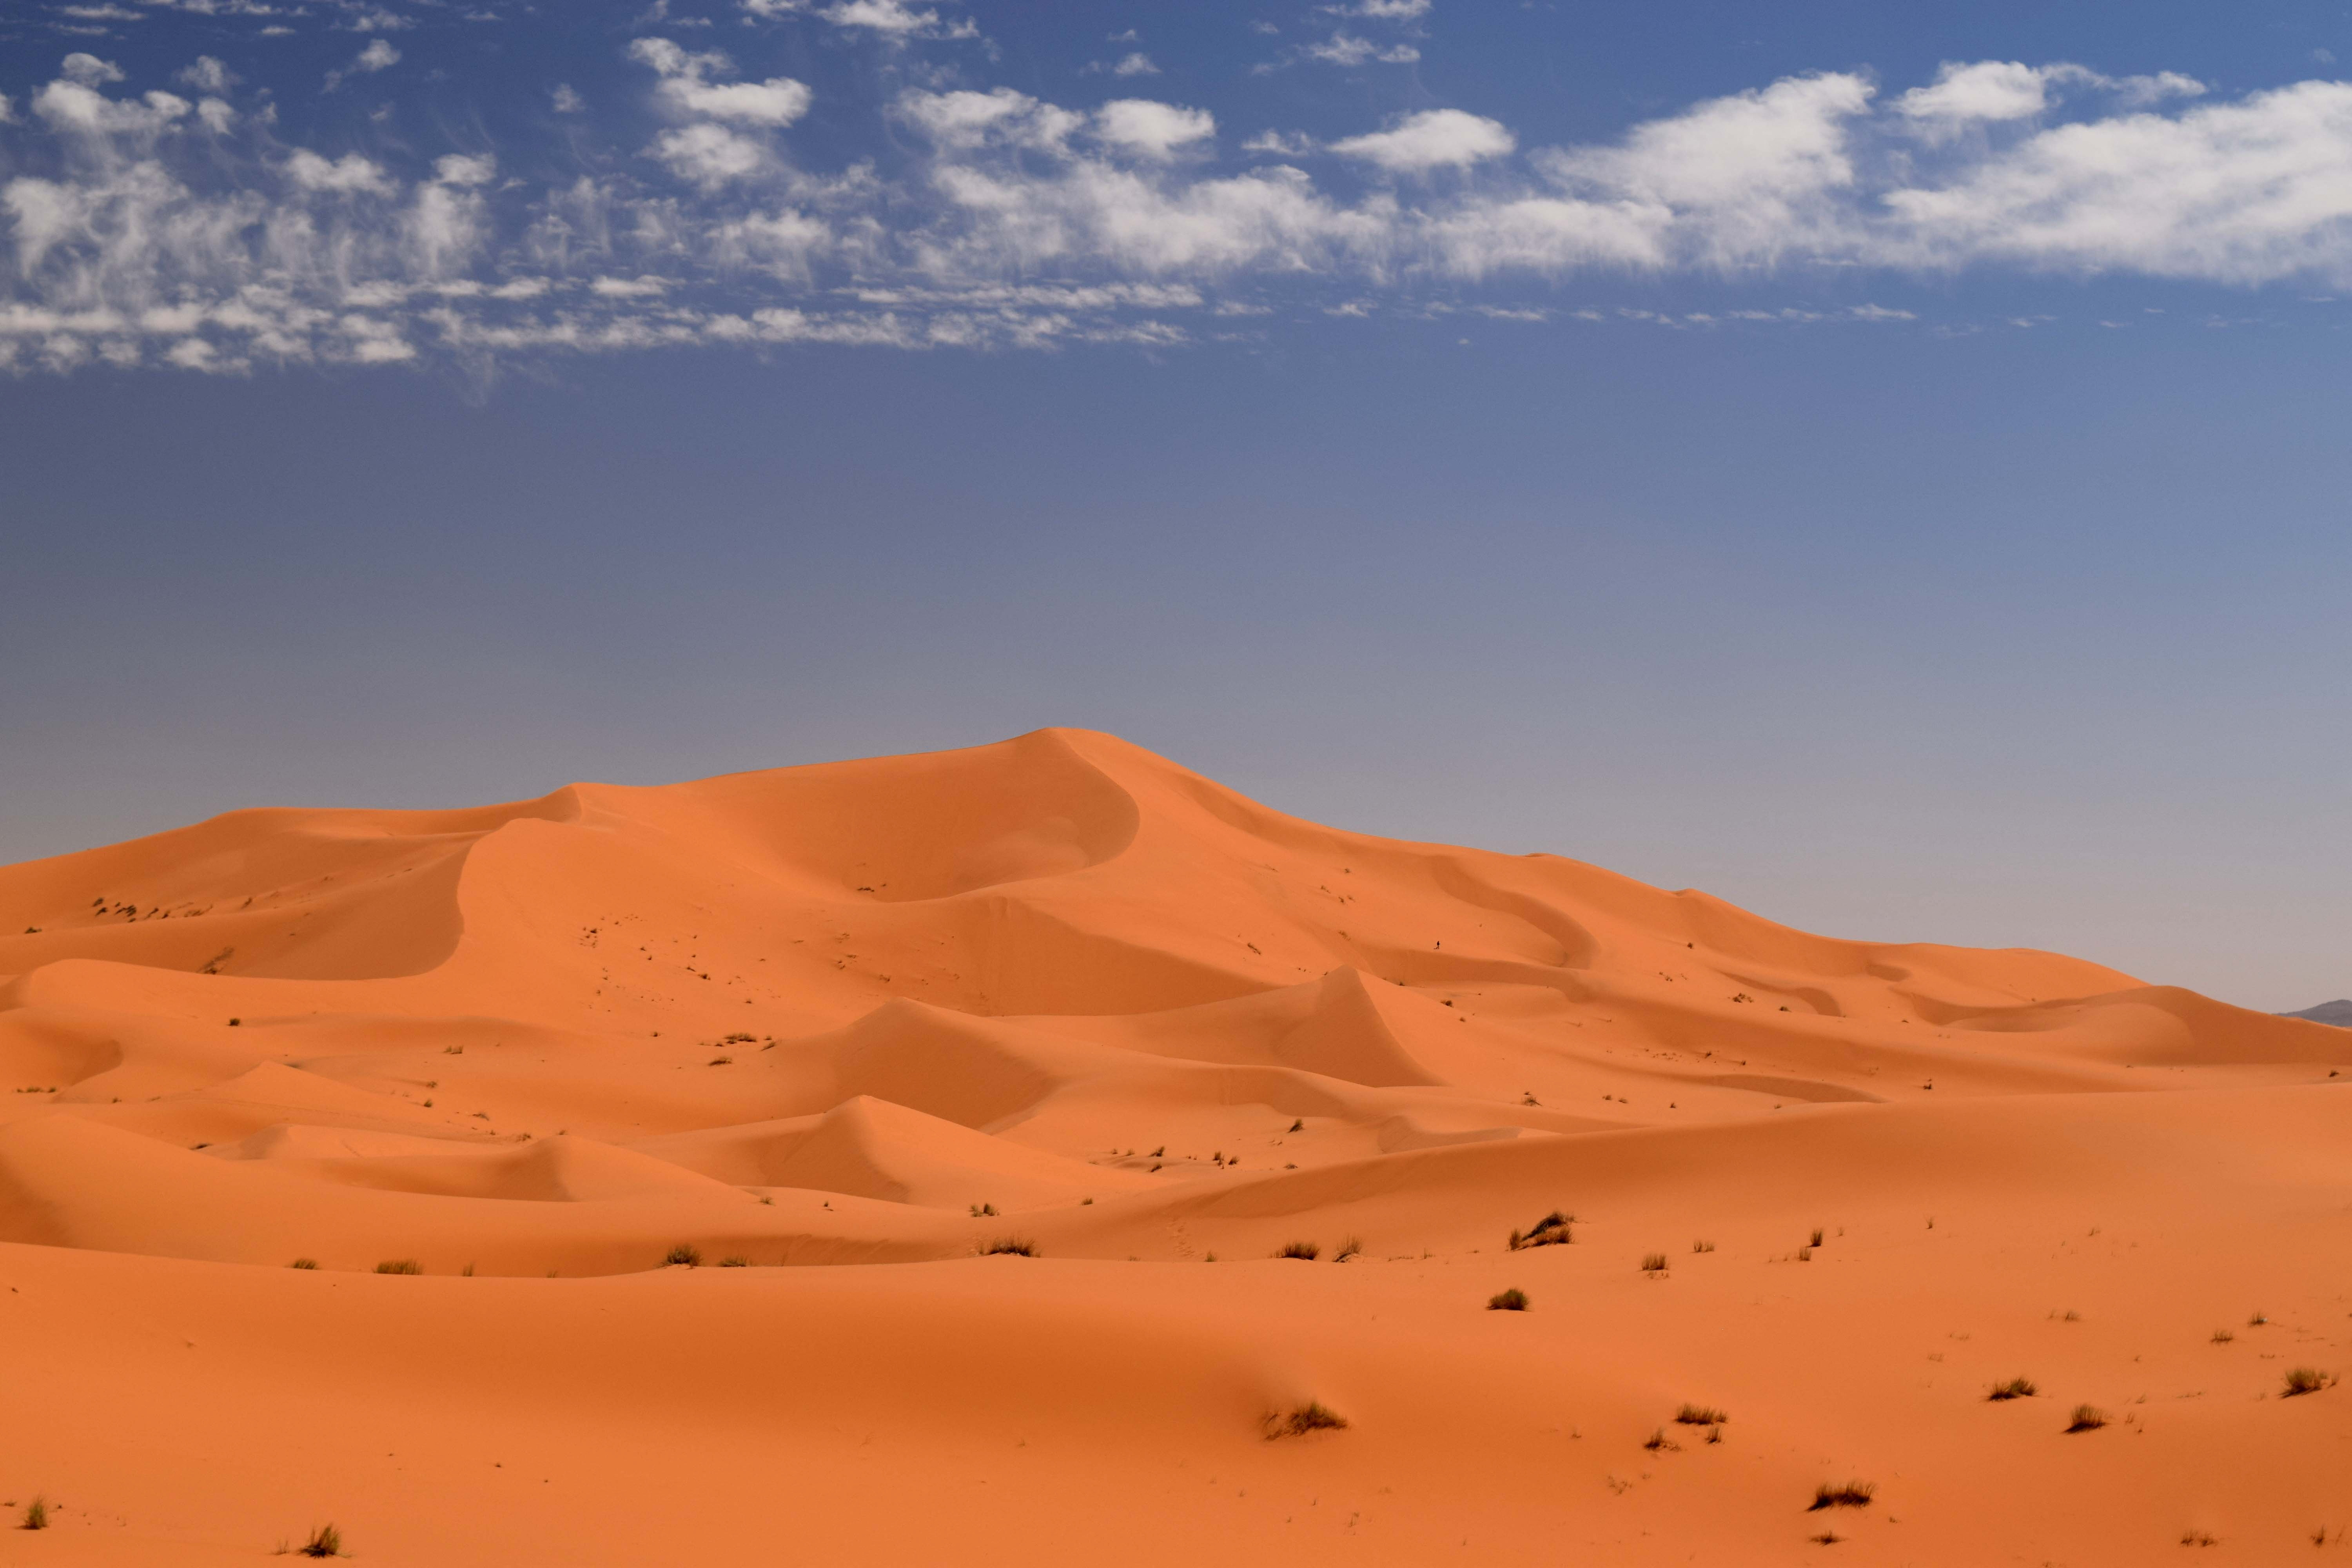 Scientists have just solved the mystery of the largest sand dune on Earth -2